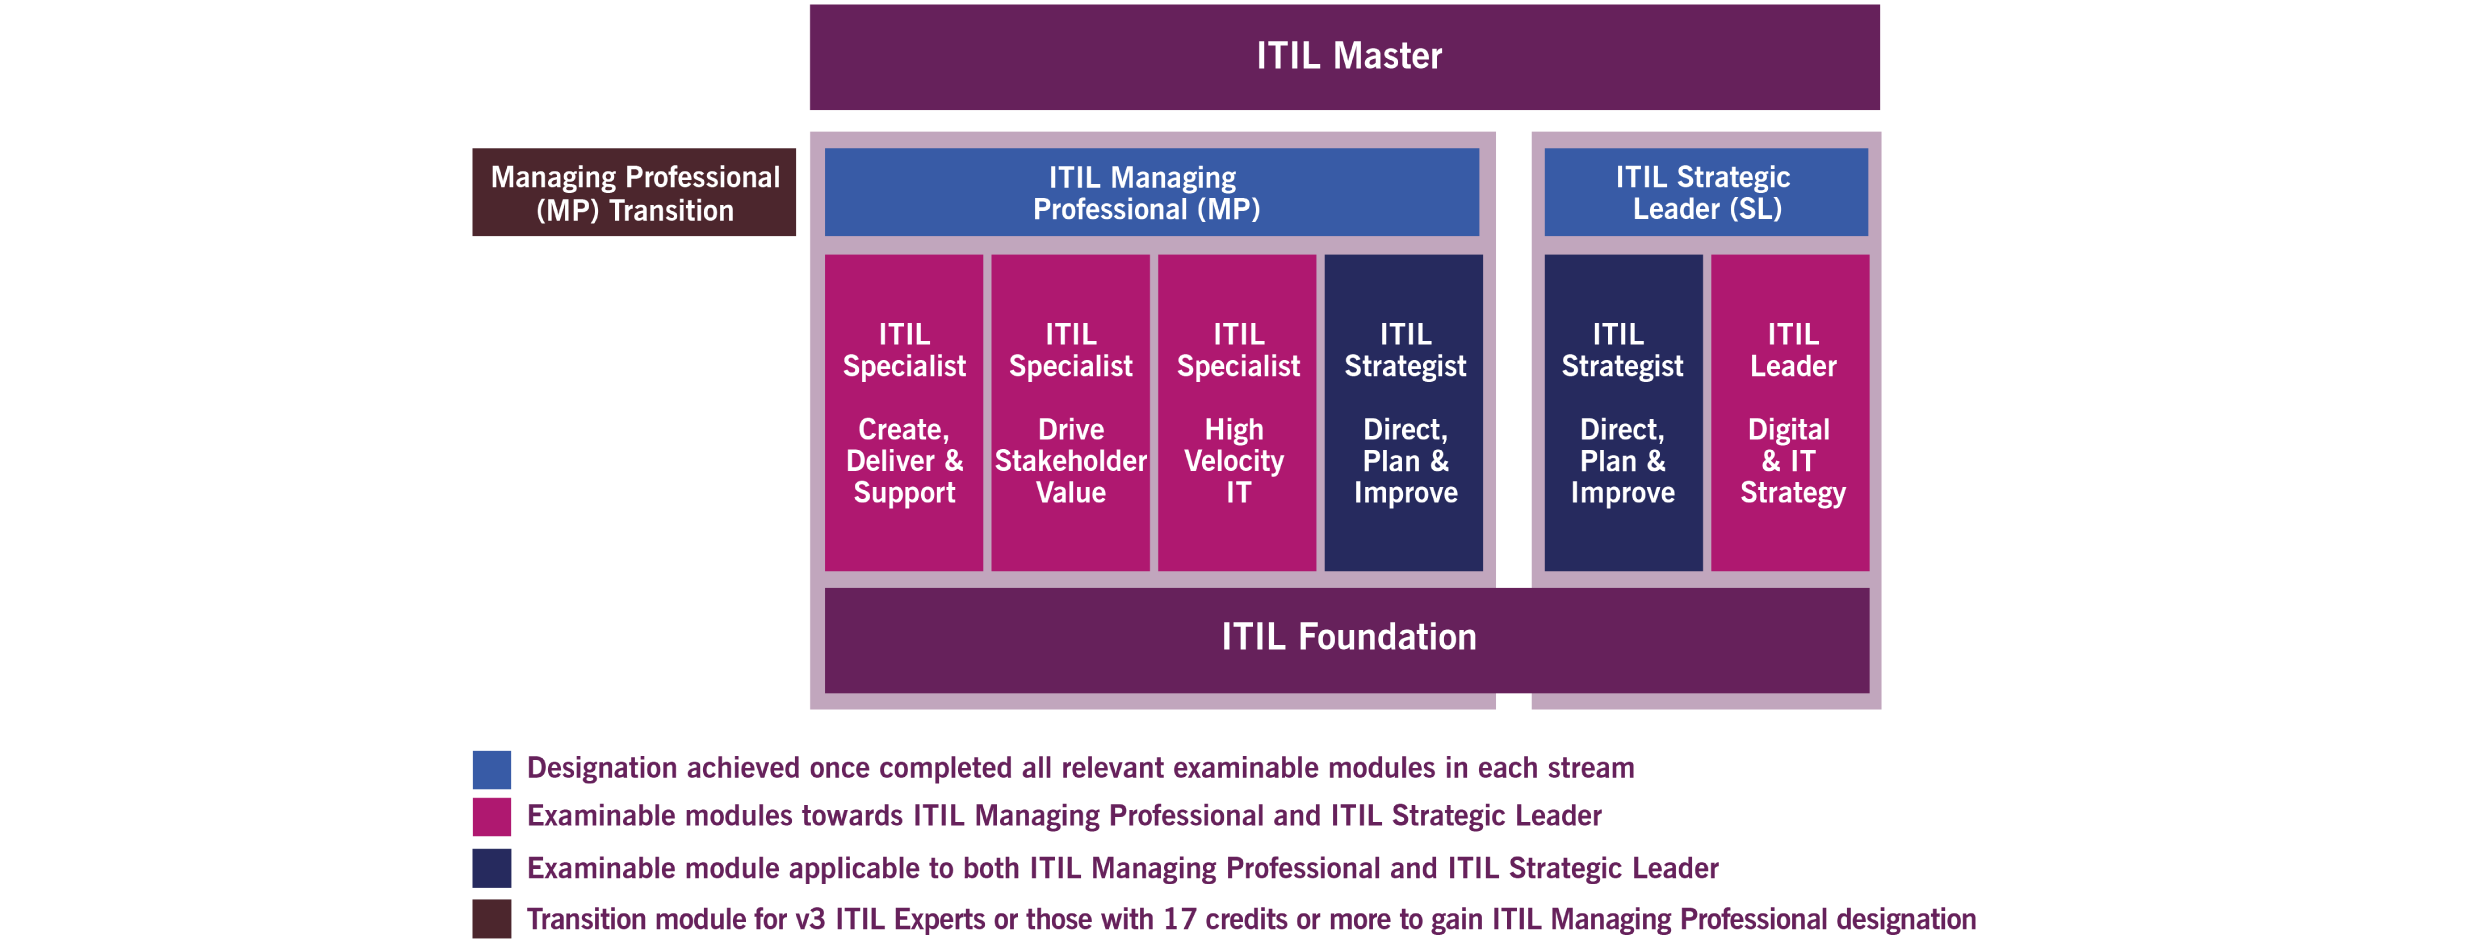 ITIL4-AP-Certification Scheme-Master-with-Transition-highres-20190225